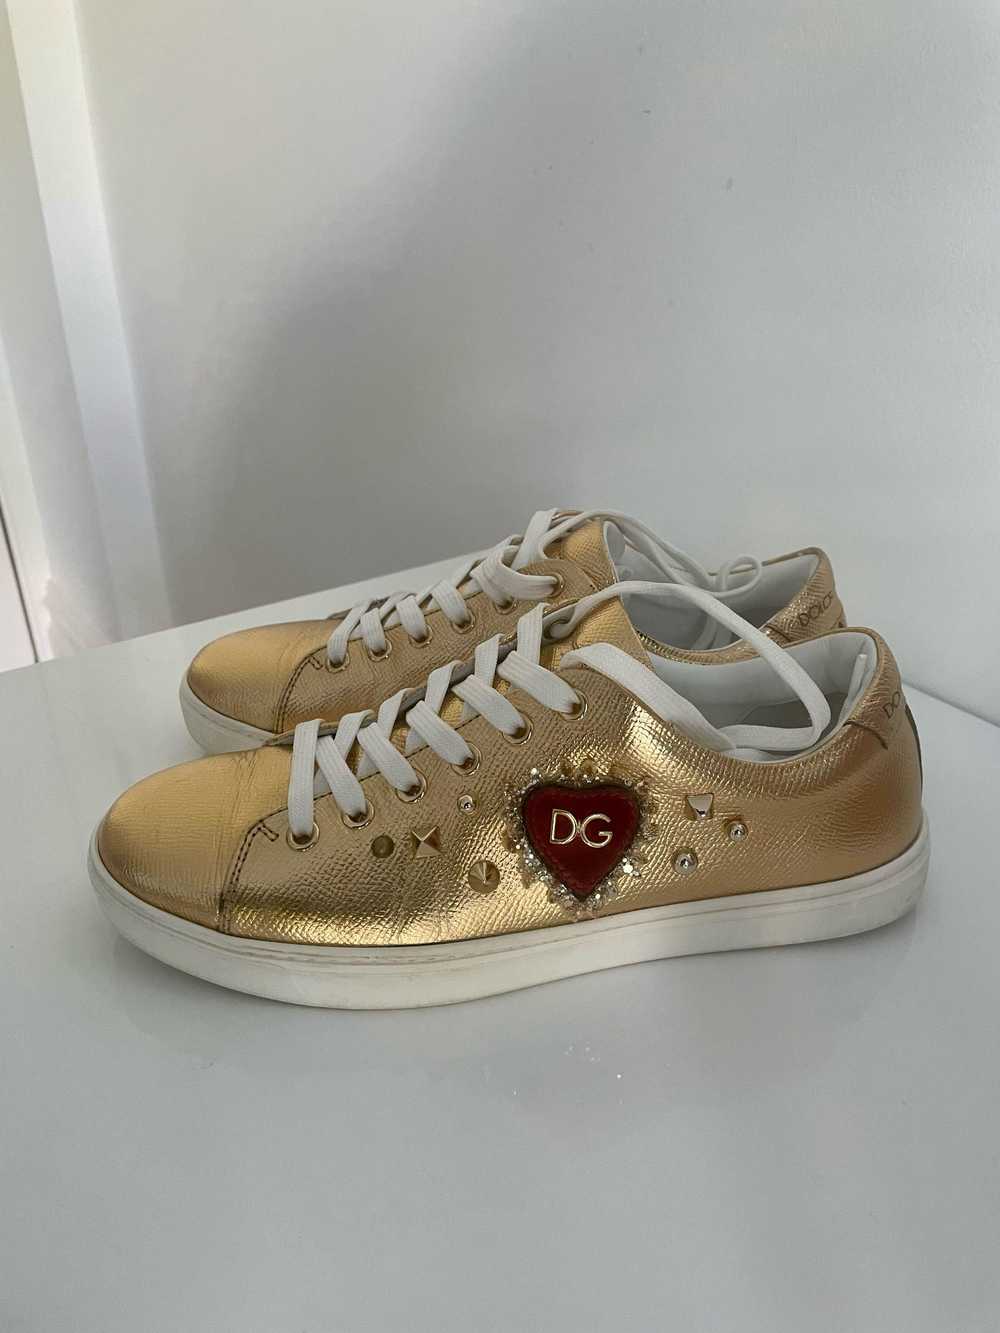 Dolce & Gabbana Gold Leather Devotion Sneakers - image 2